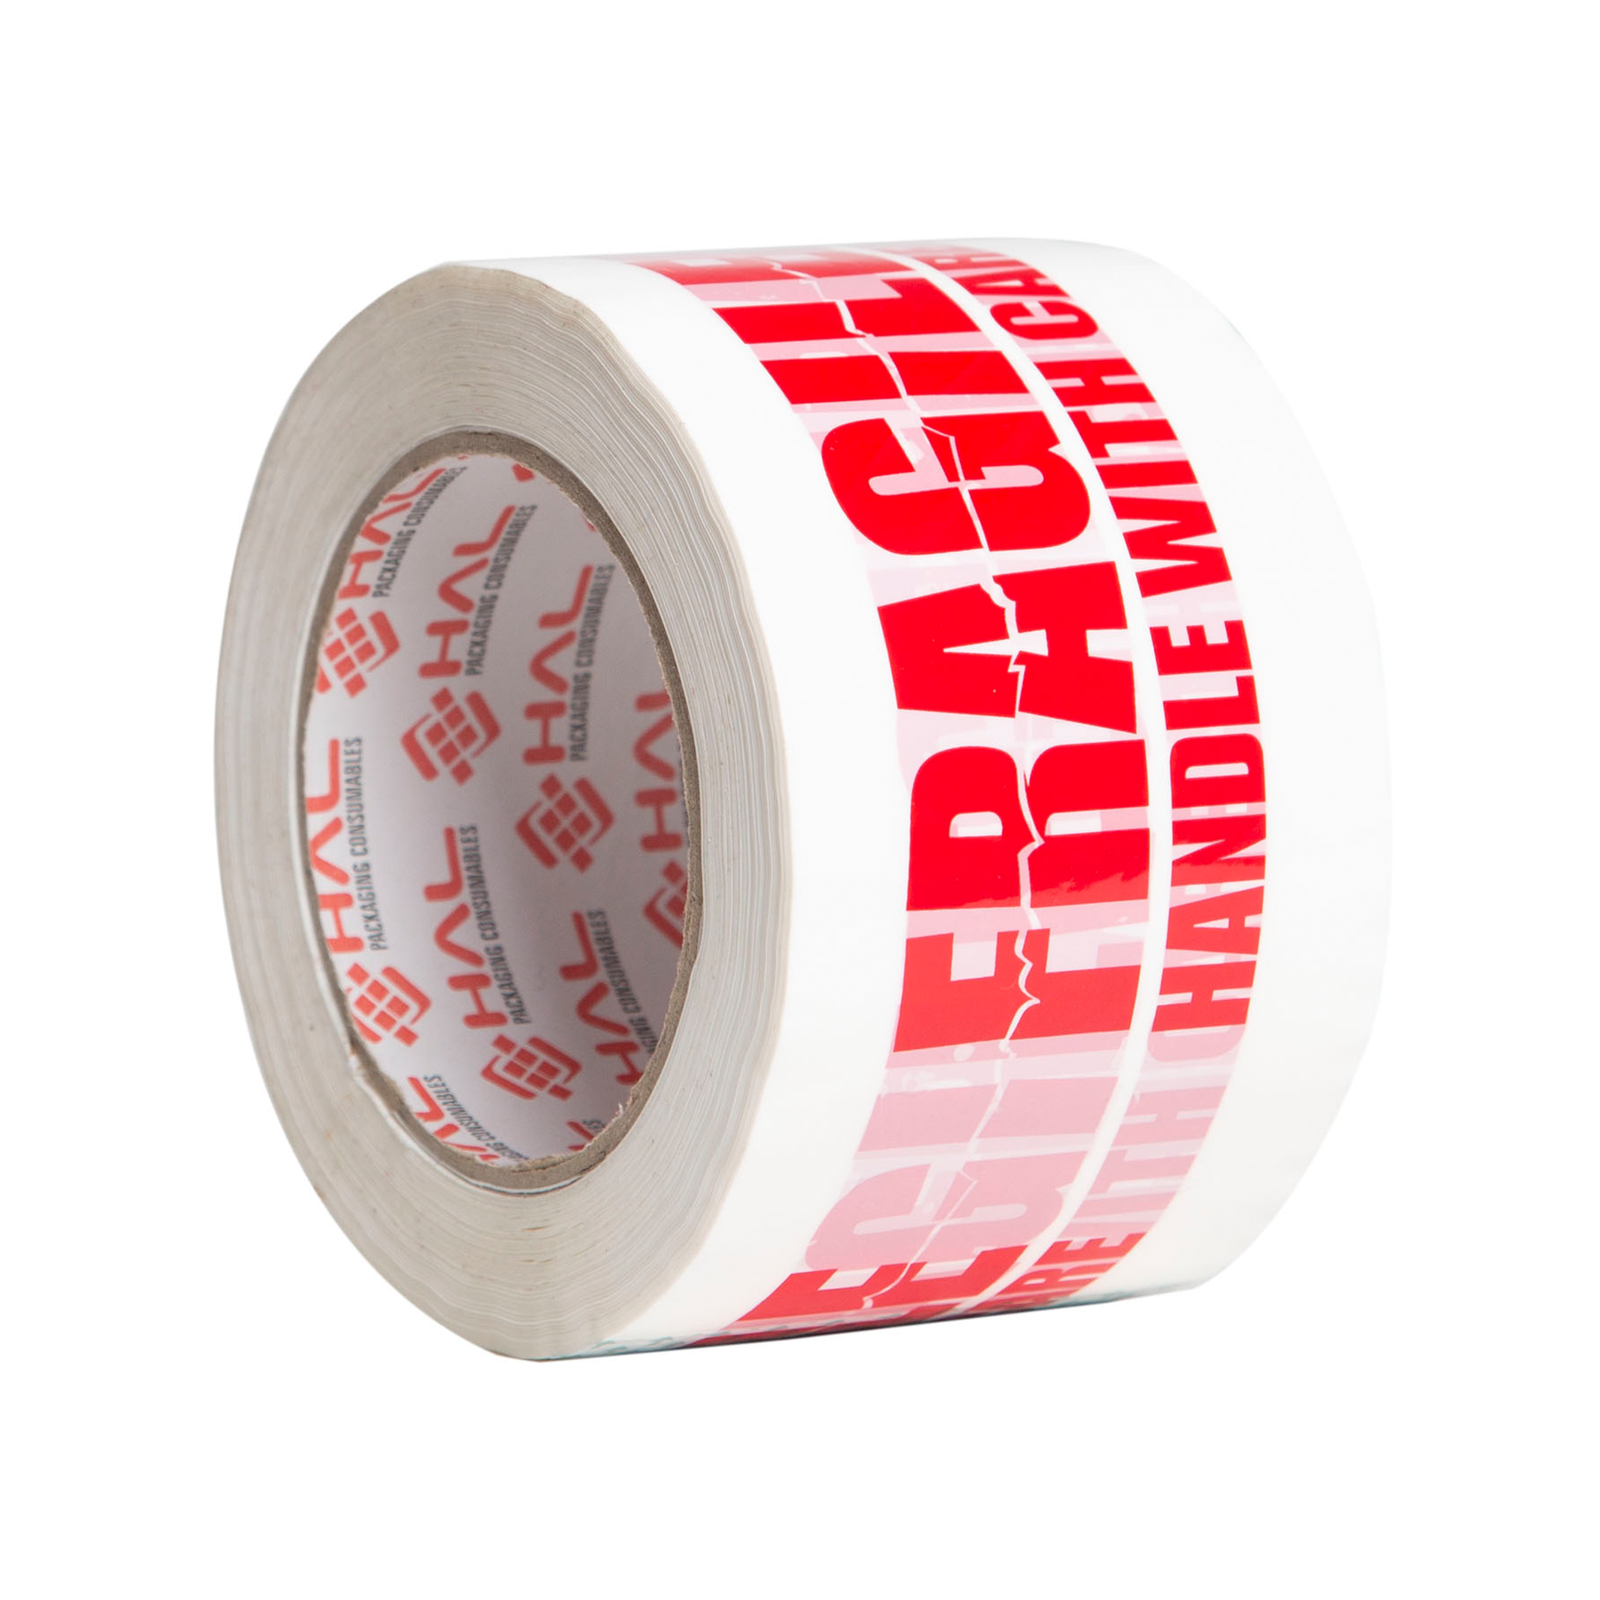 Fragile Printed Moving and Shipping Tape Cream/Black by Shippy Tape